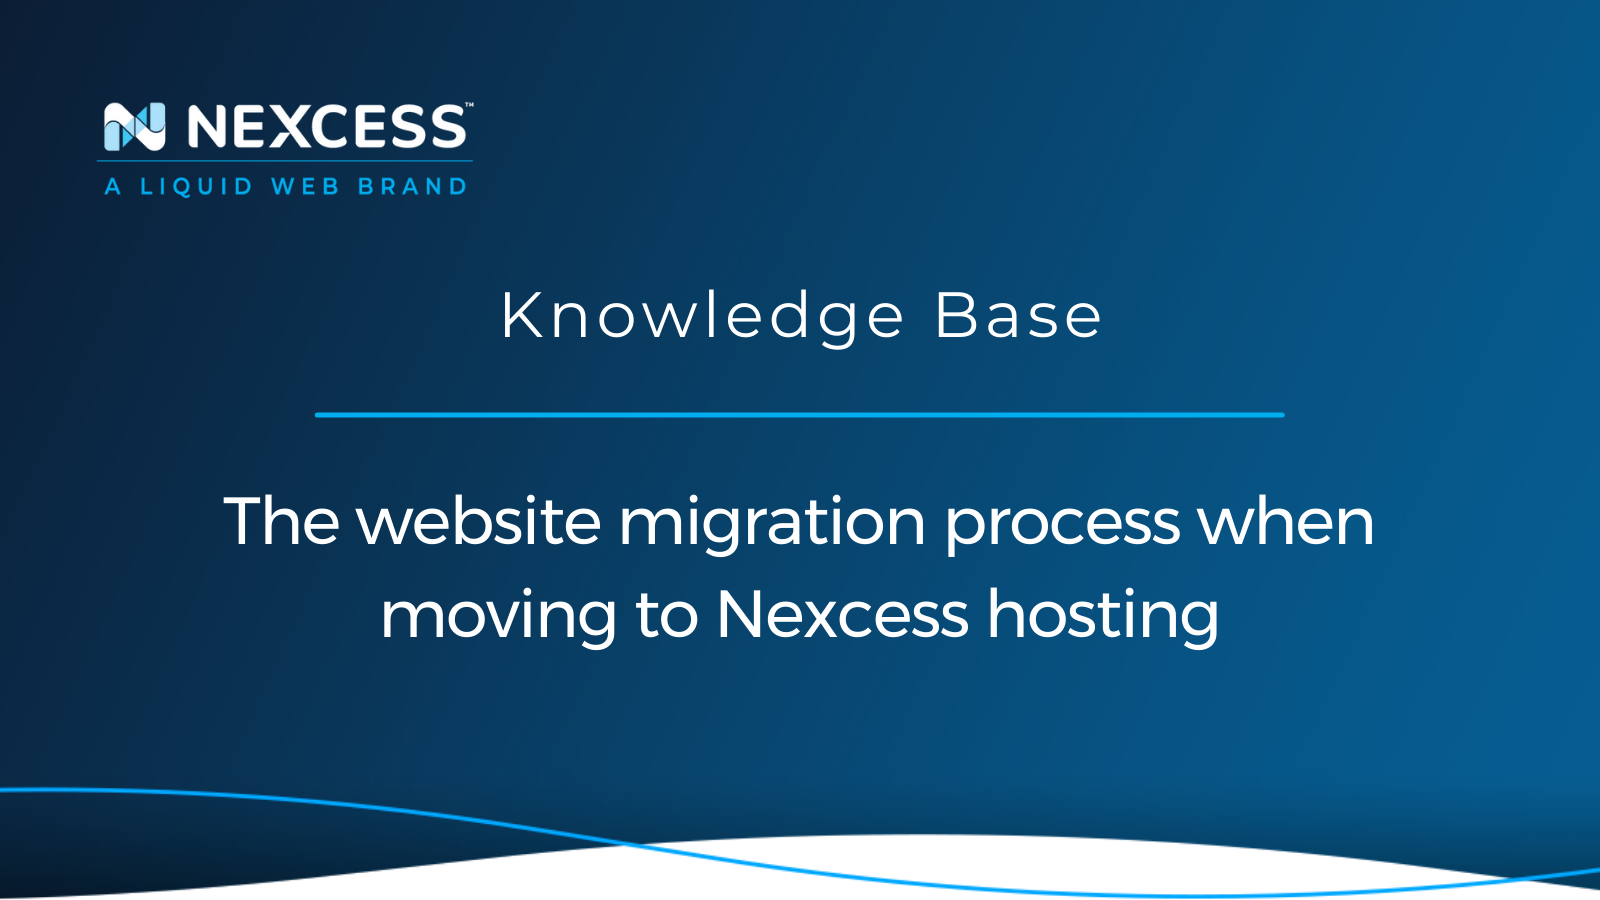 The website migration process when moving to Nexcess hosting